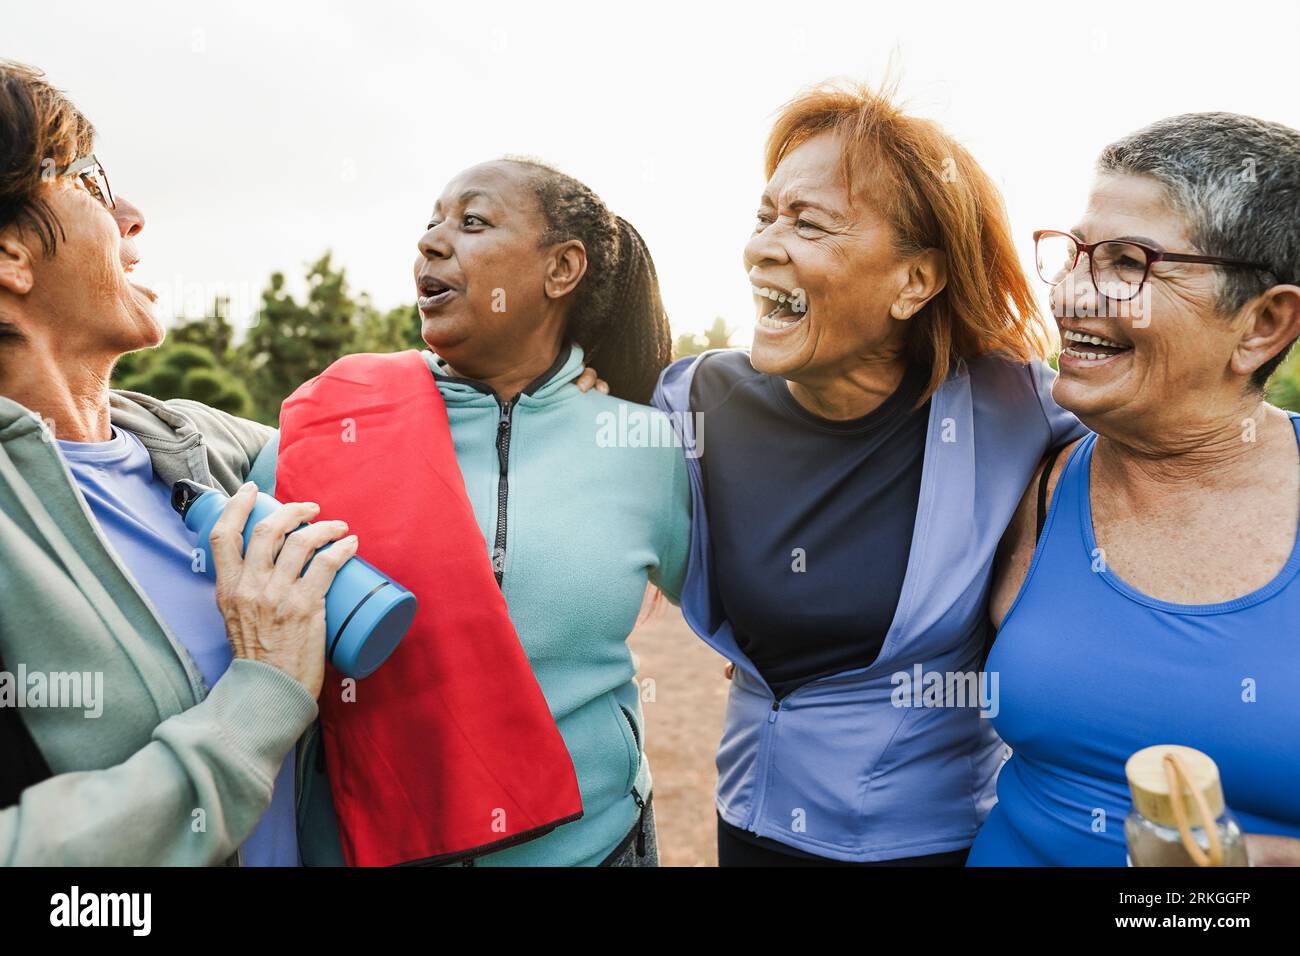 Happy senior women having fun laughing together after yoga class outdoor at city park - Sport and healthy lifestyle concept Stock Photo